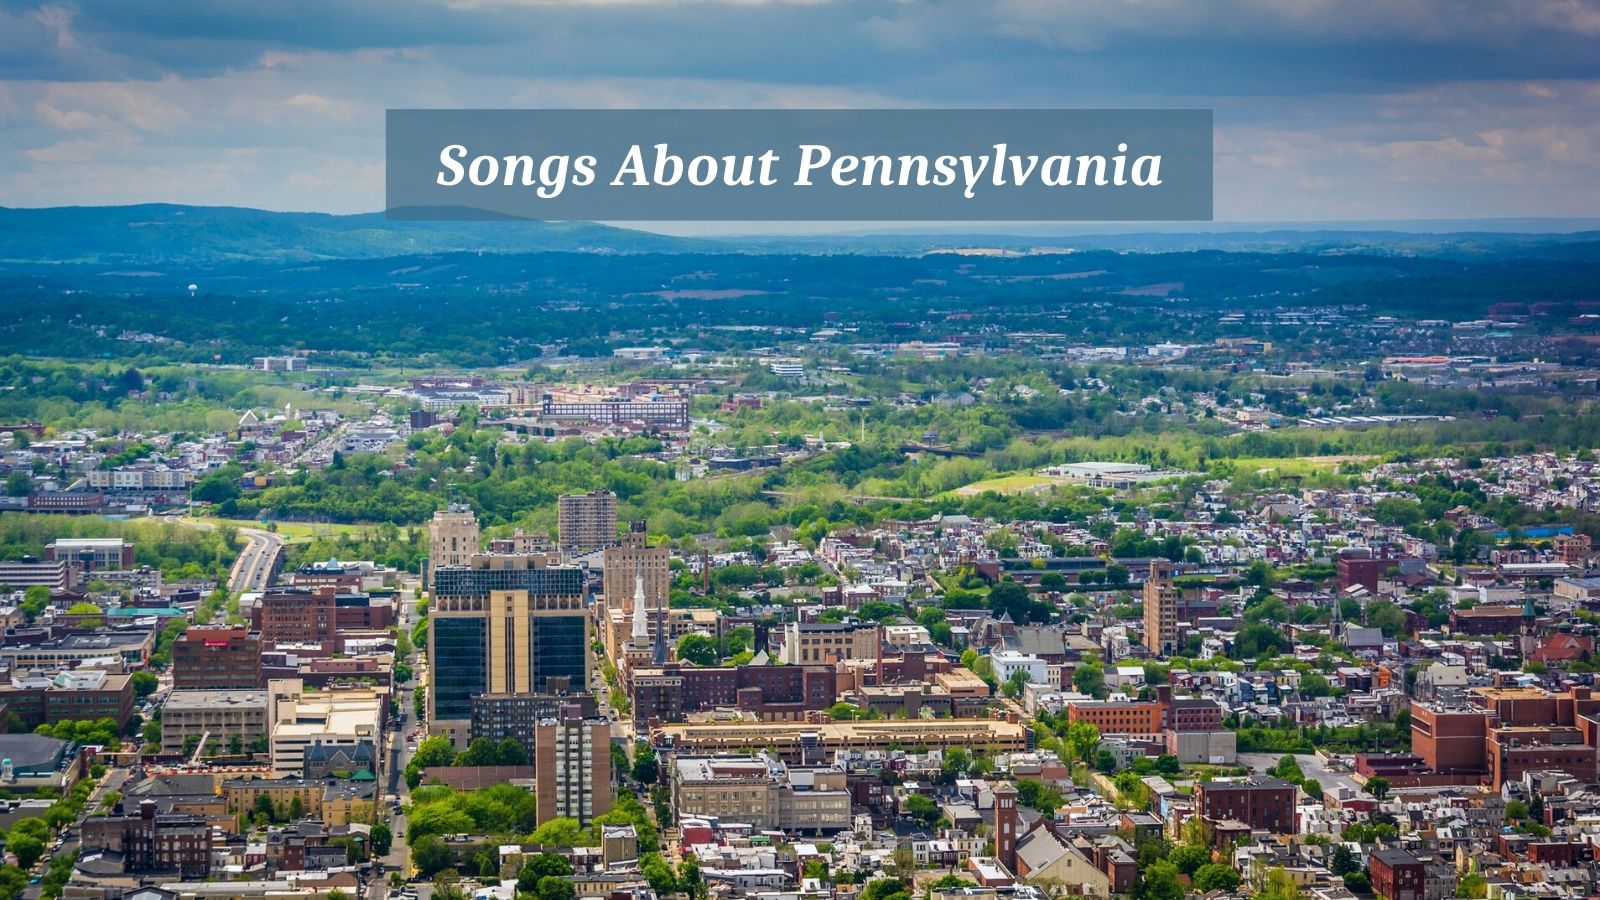 Songs About Pennsylvania